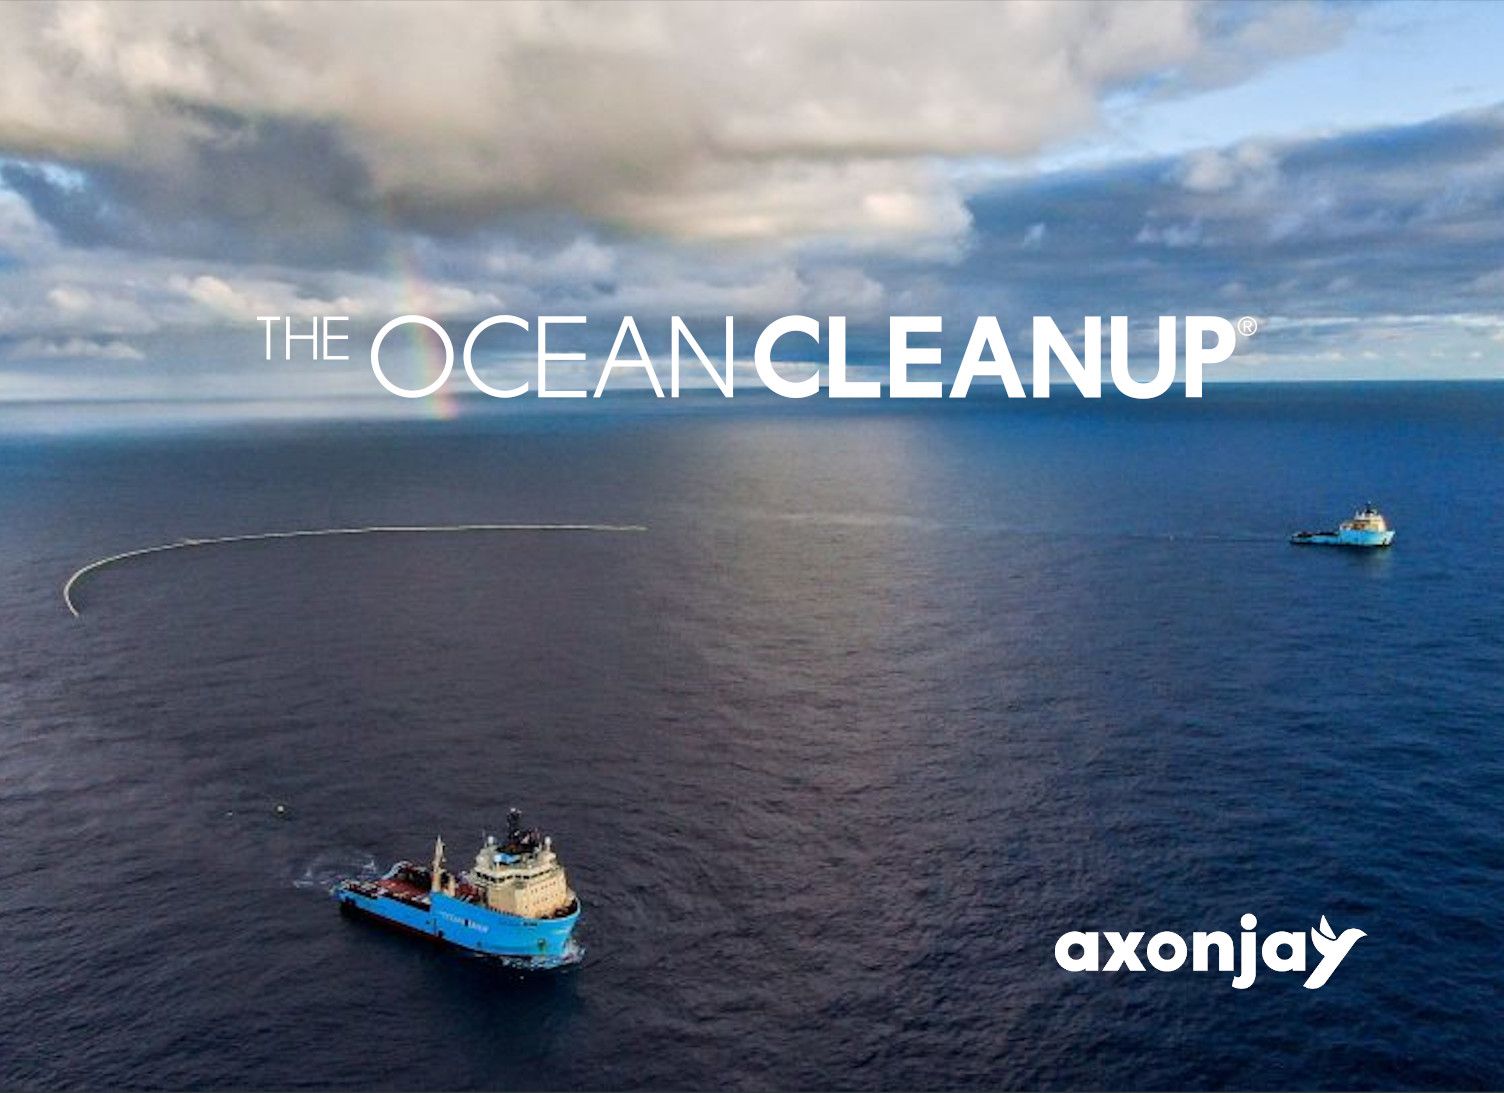 Theoceancleanup